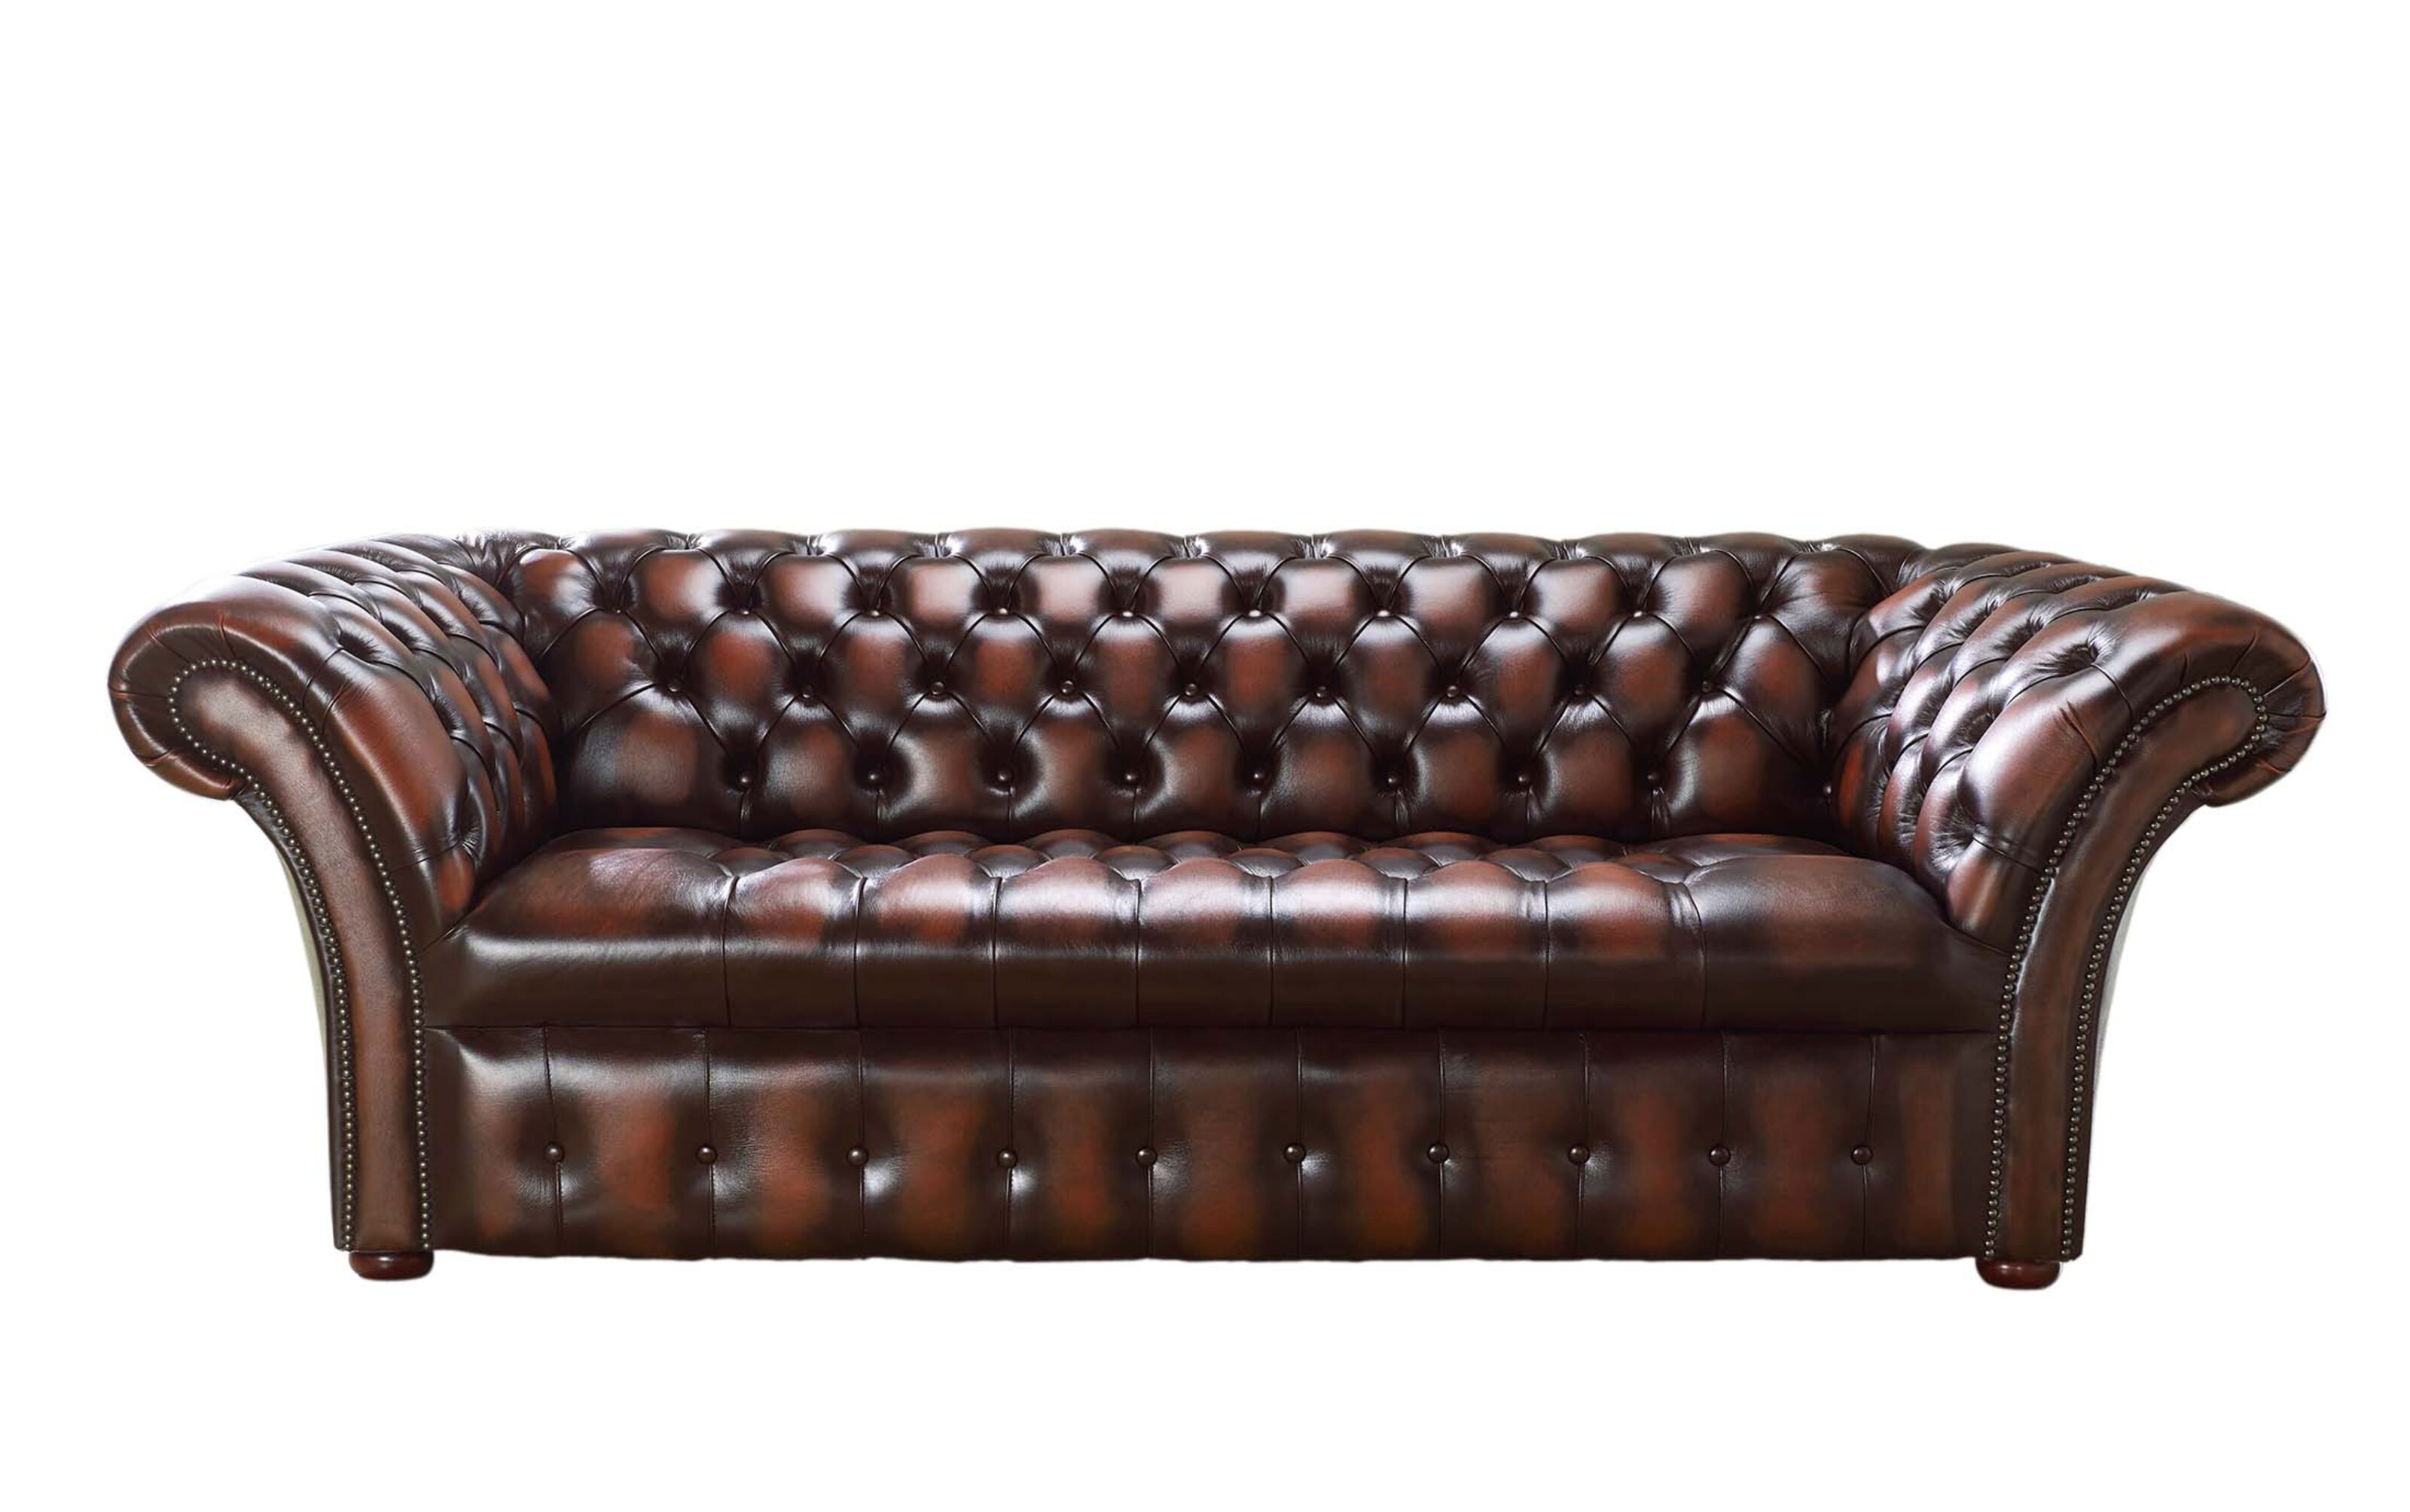 Modern or Classic: Choosing Your Dream Chesterfield Sofa  %Post Title